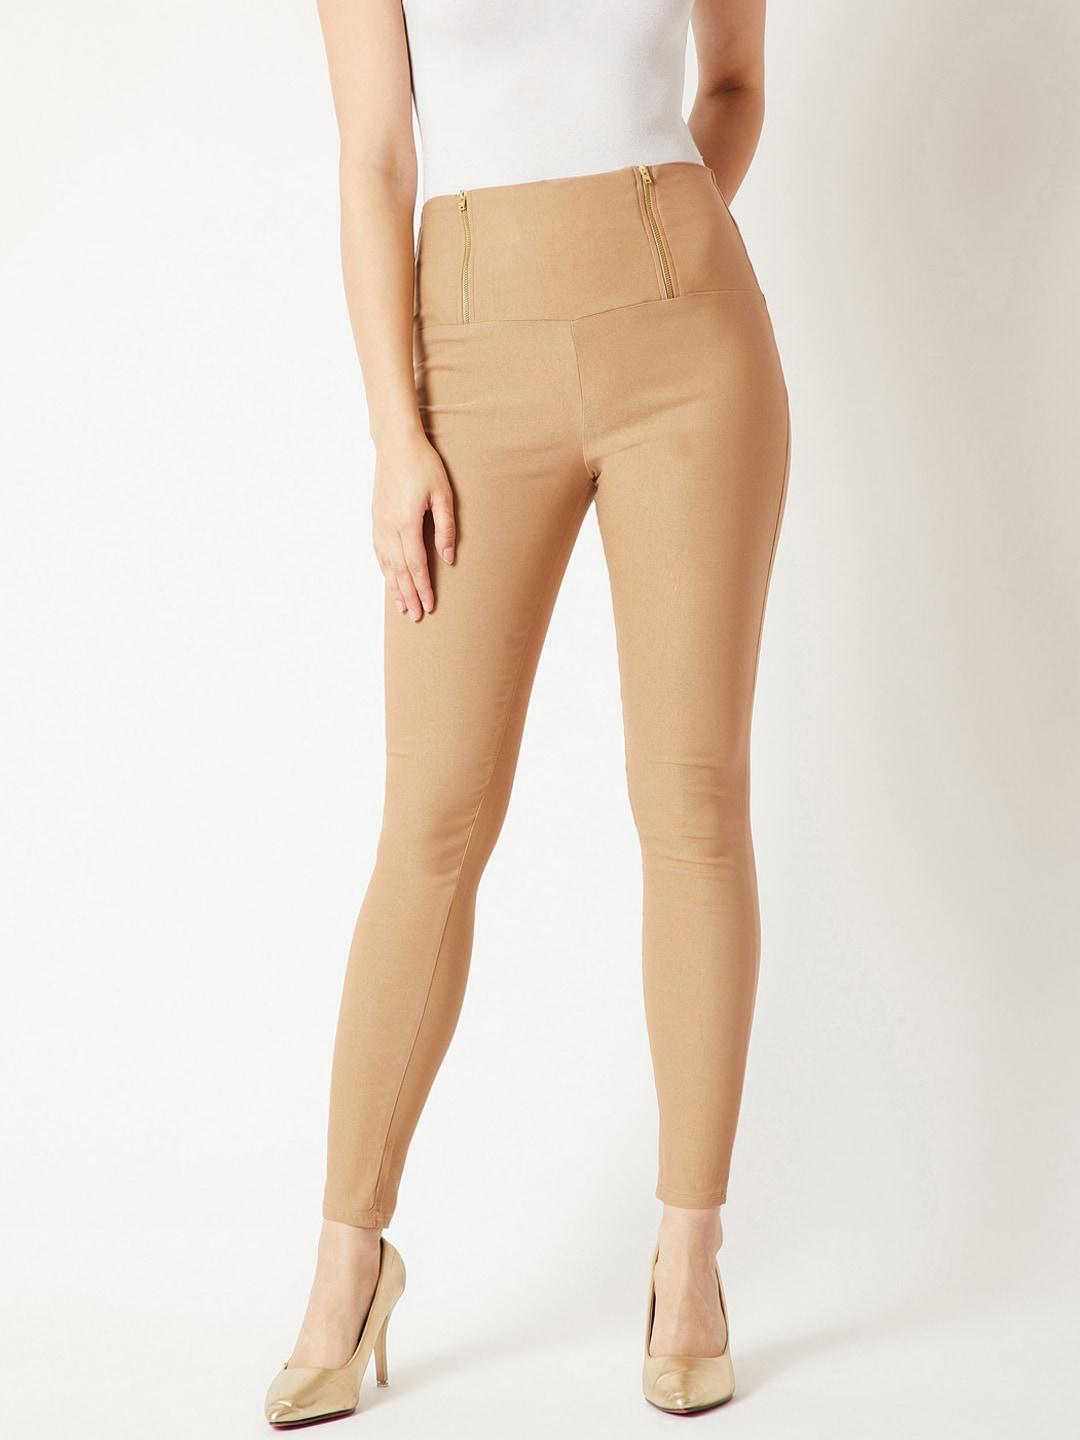 miss-chase-beige-solid-slim-fit-jeggings